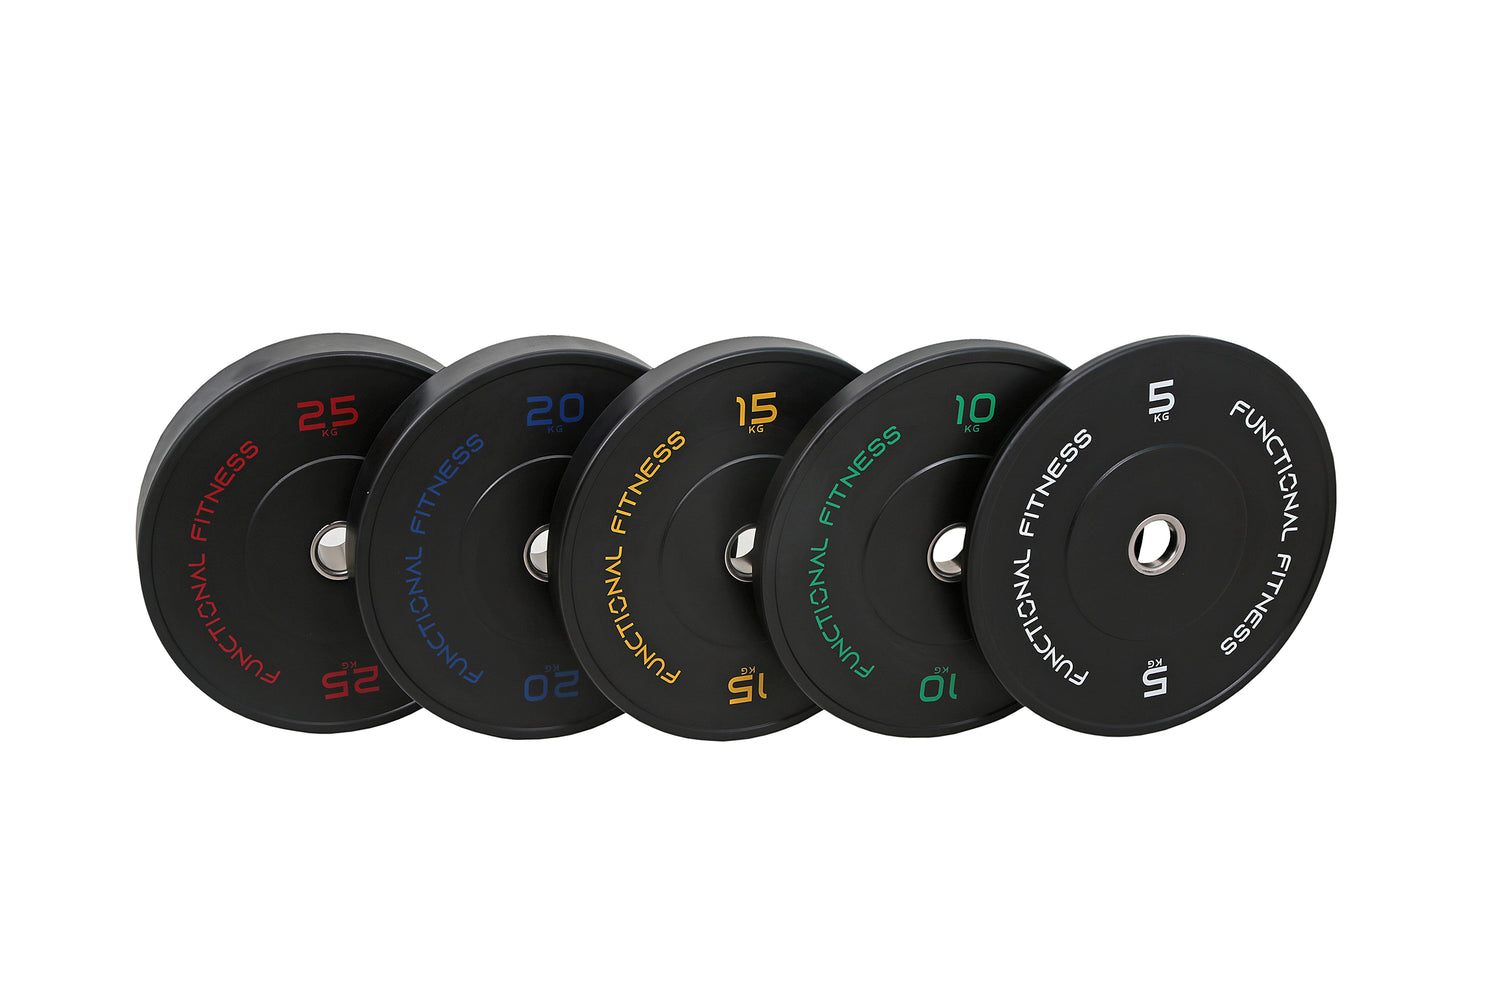 Black Olympic Rubber Bumper Plates